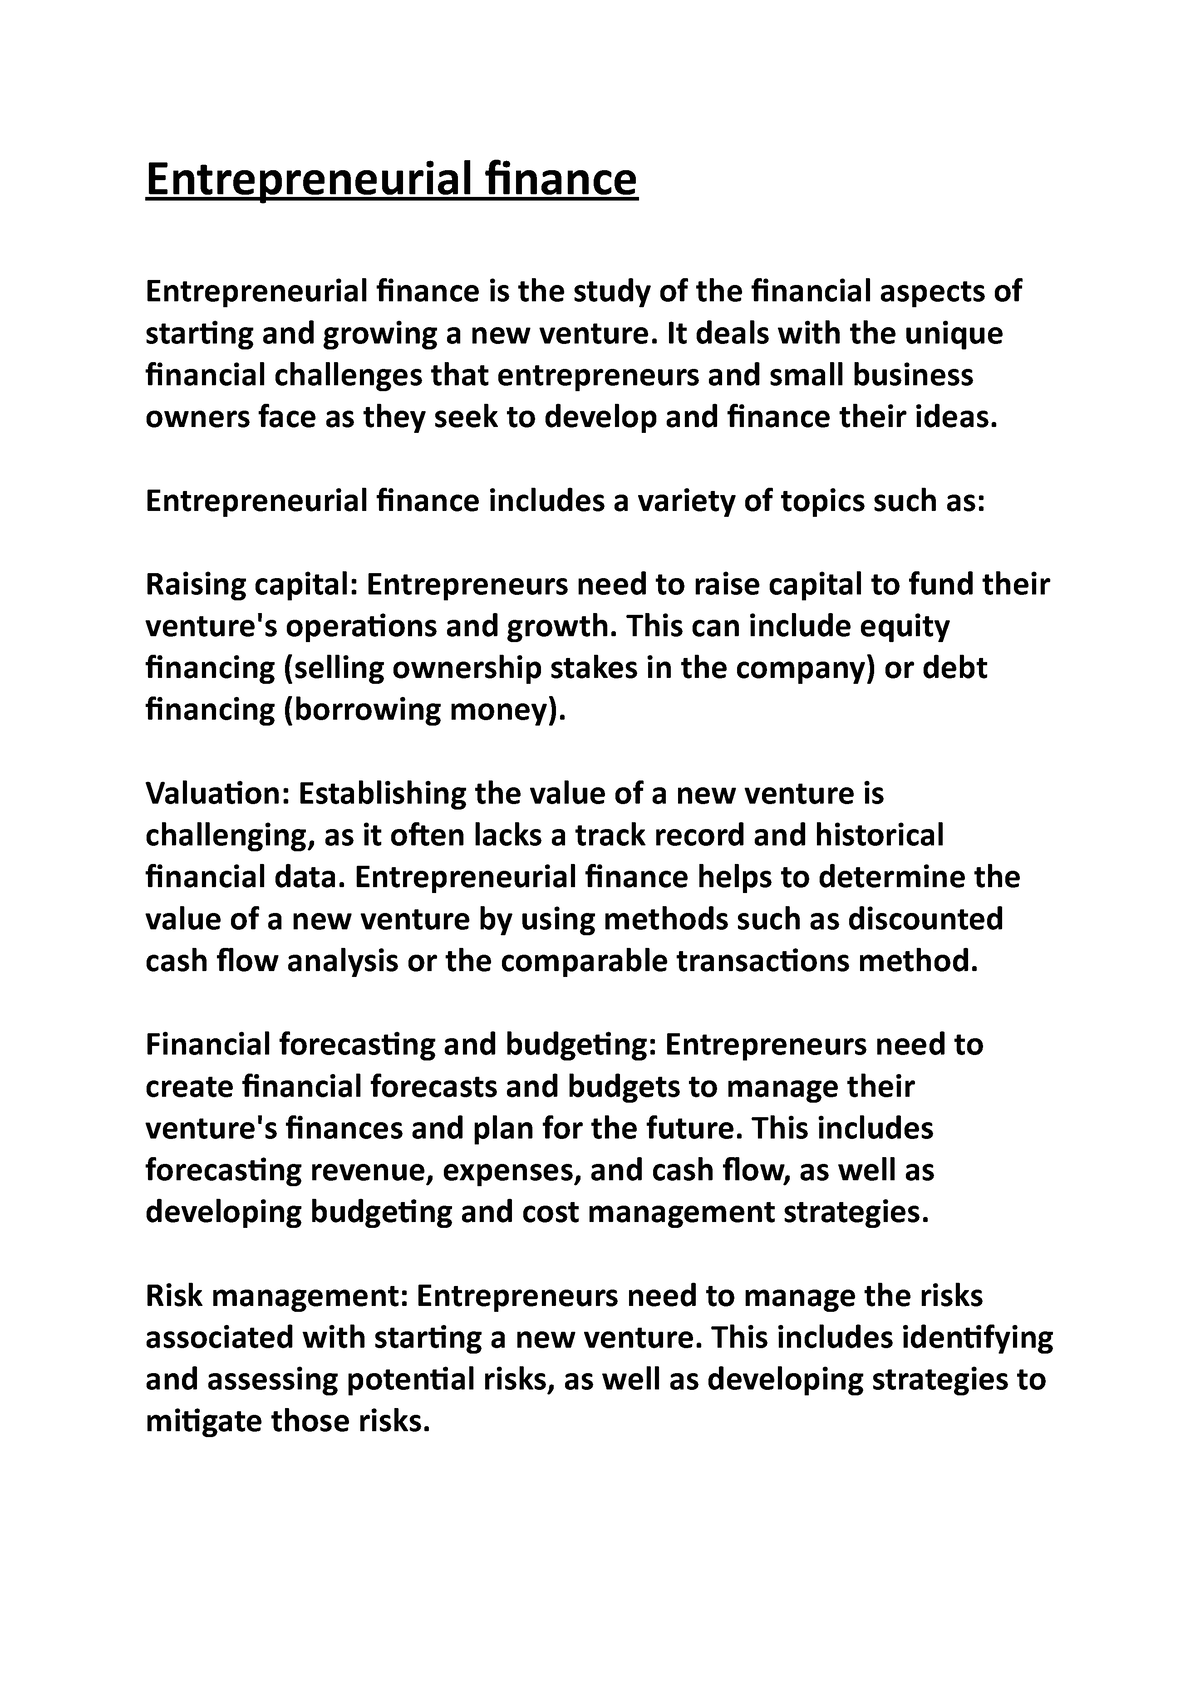 thesis on entrepreneurial finance